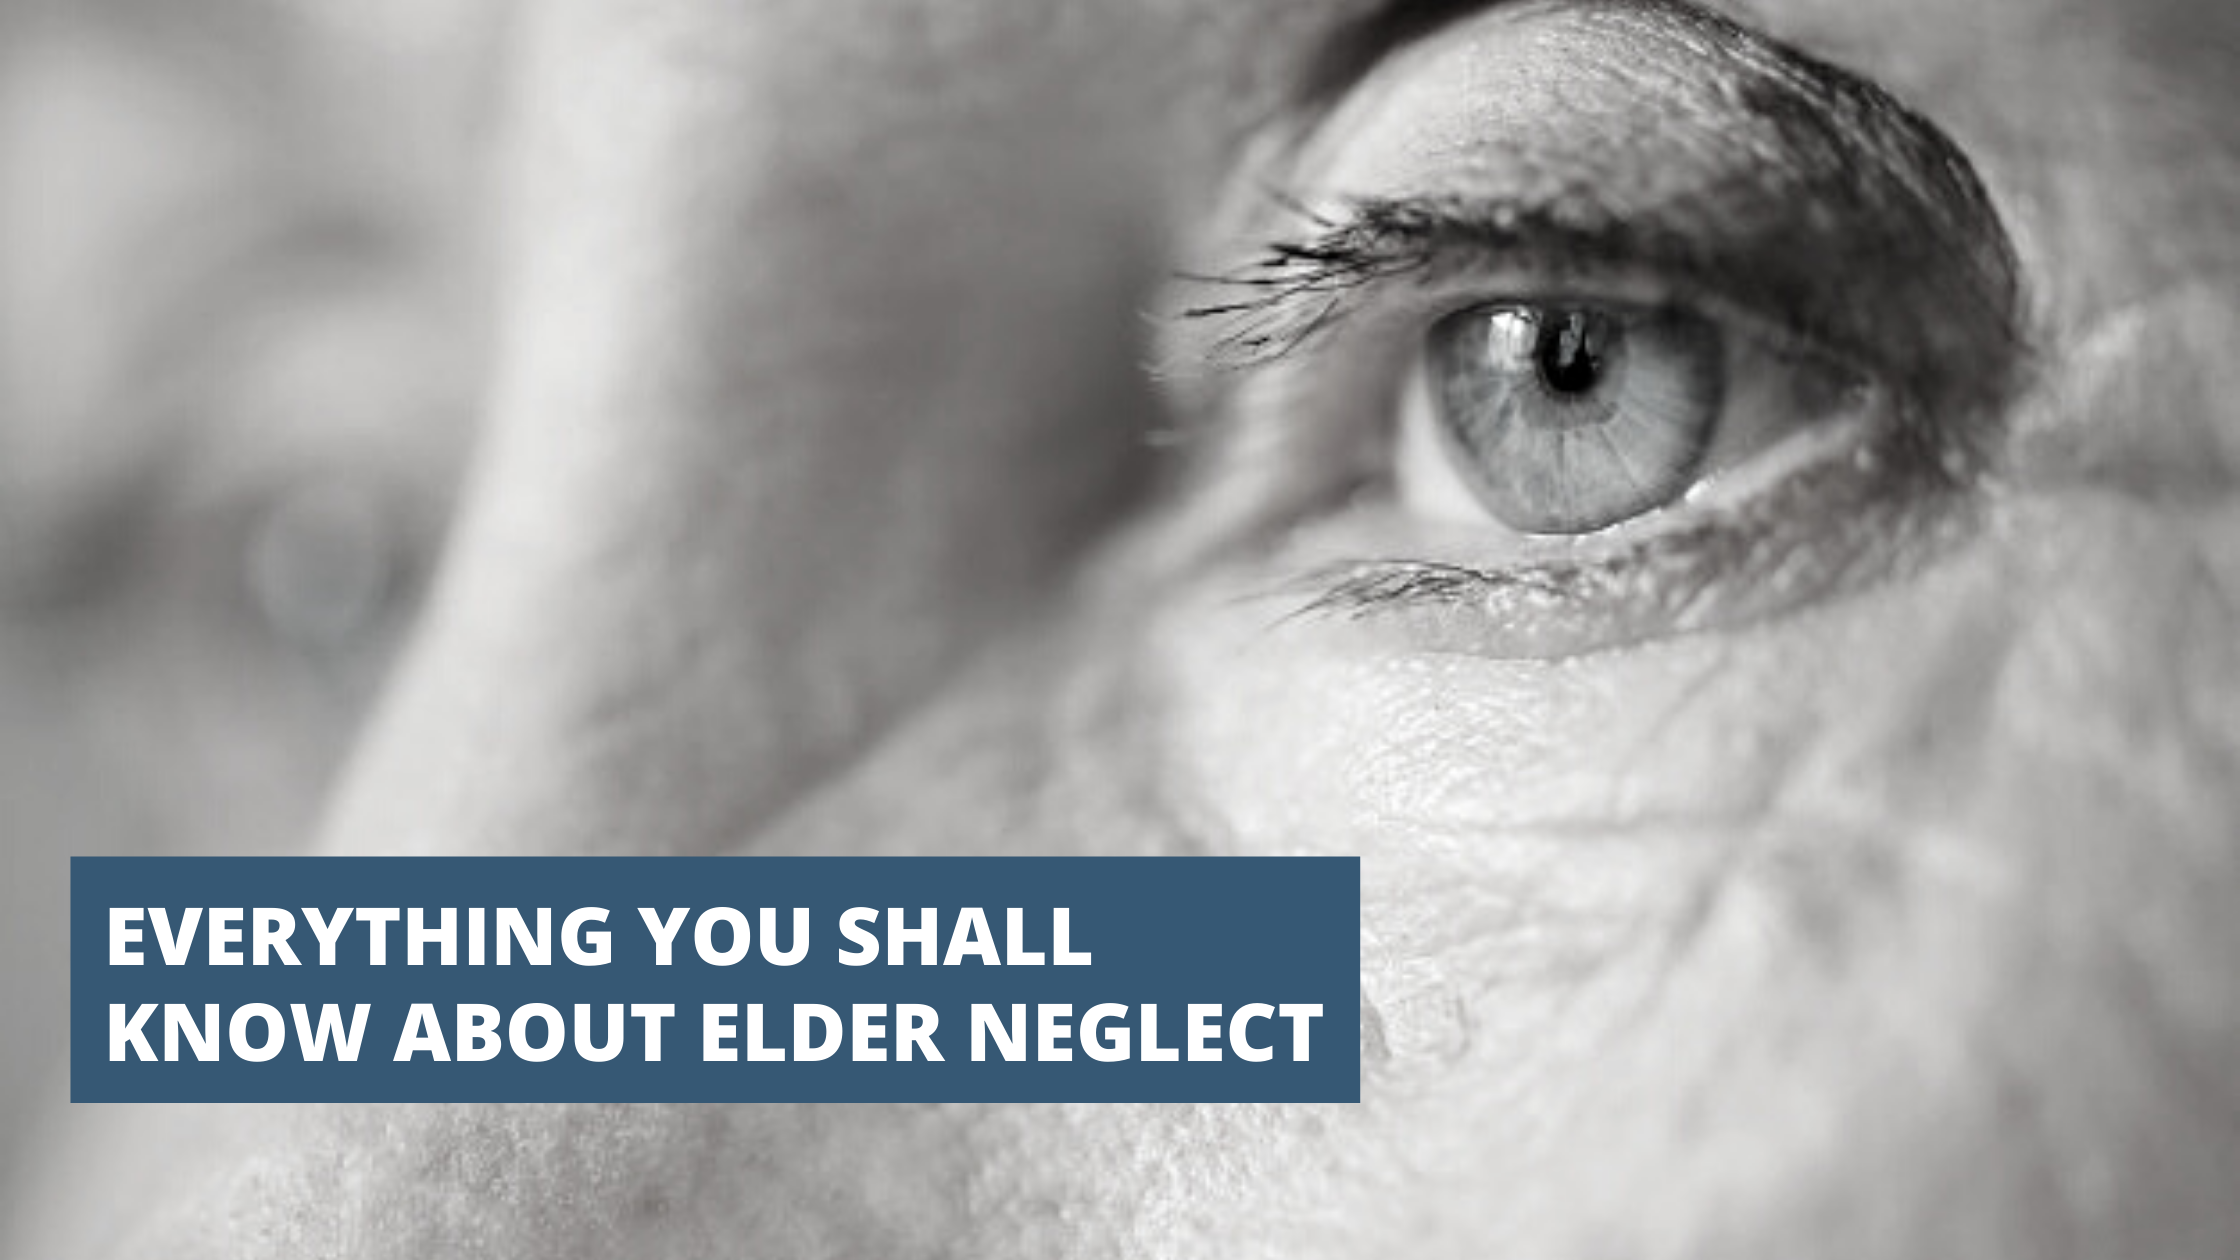 Everything you shall know about elder neglect